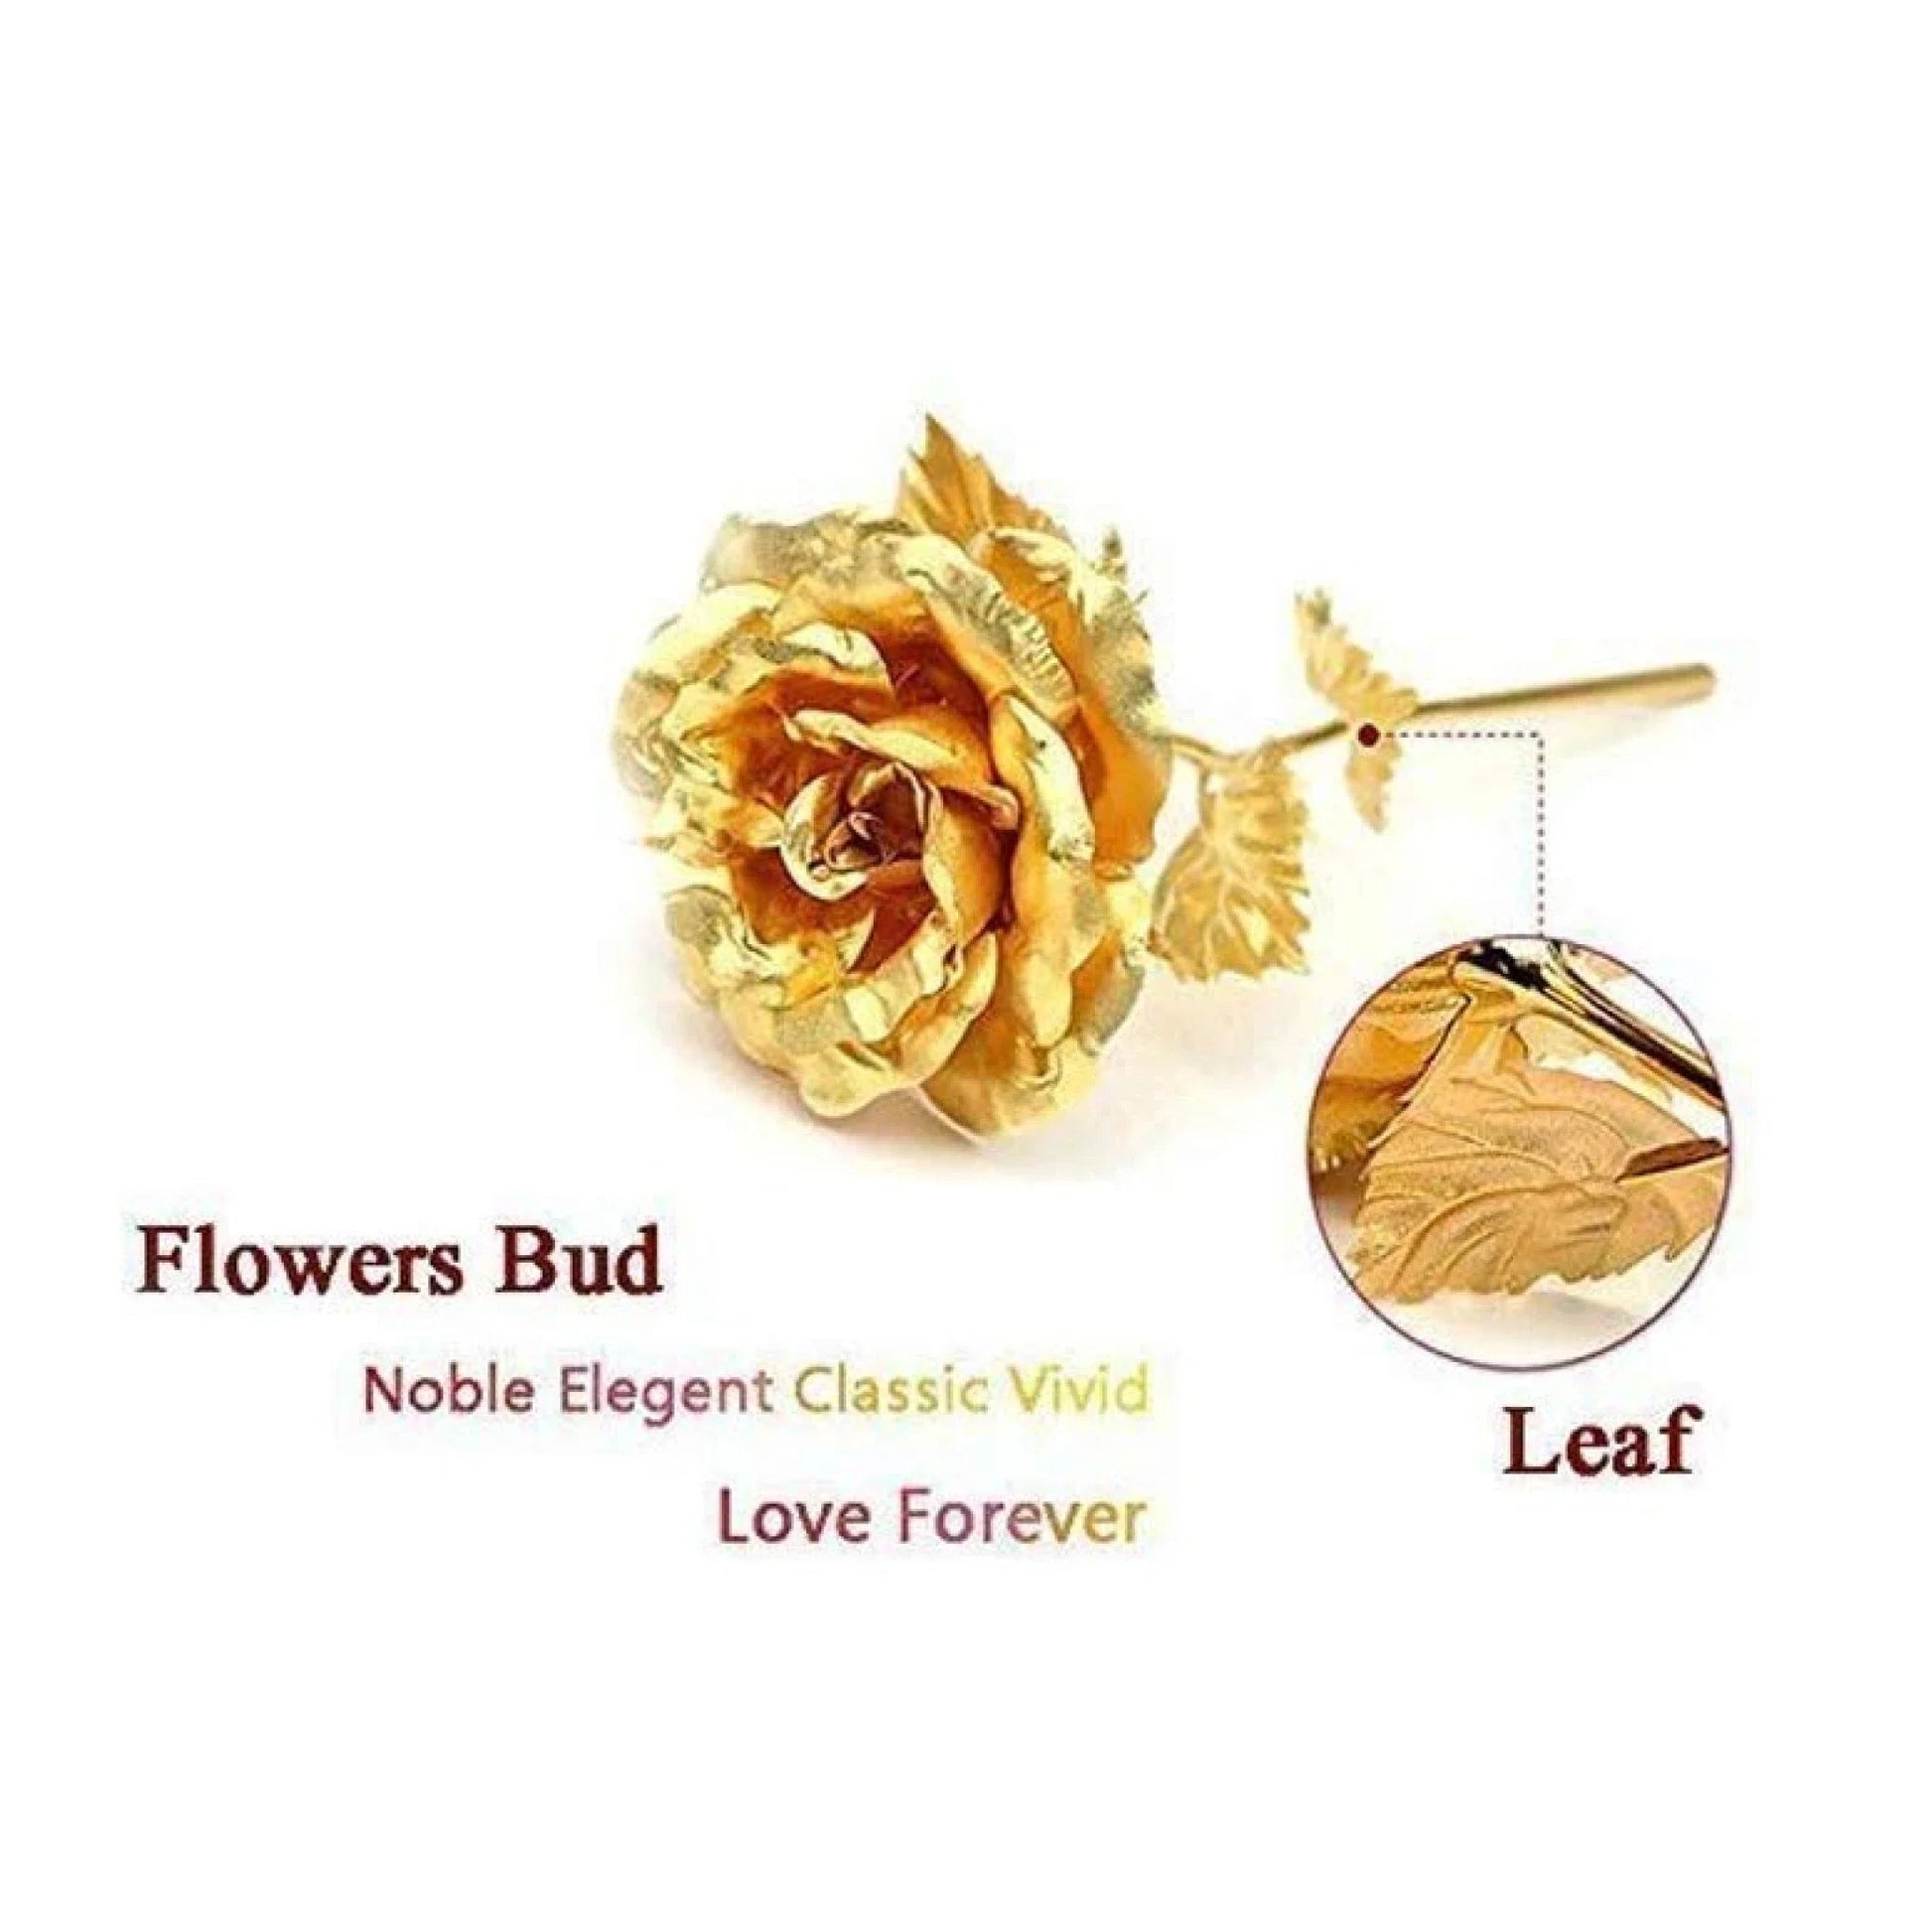 "Express the unsaid and show your love by gifting the marvelous gold plated roses.  "